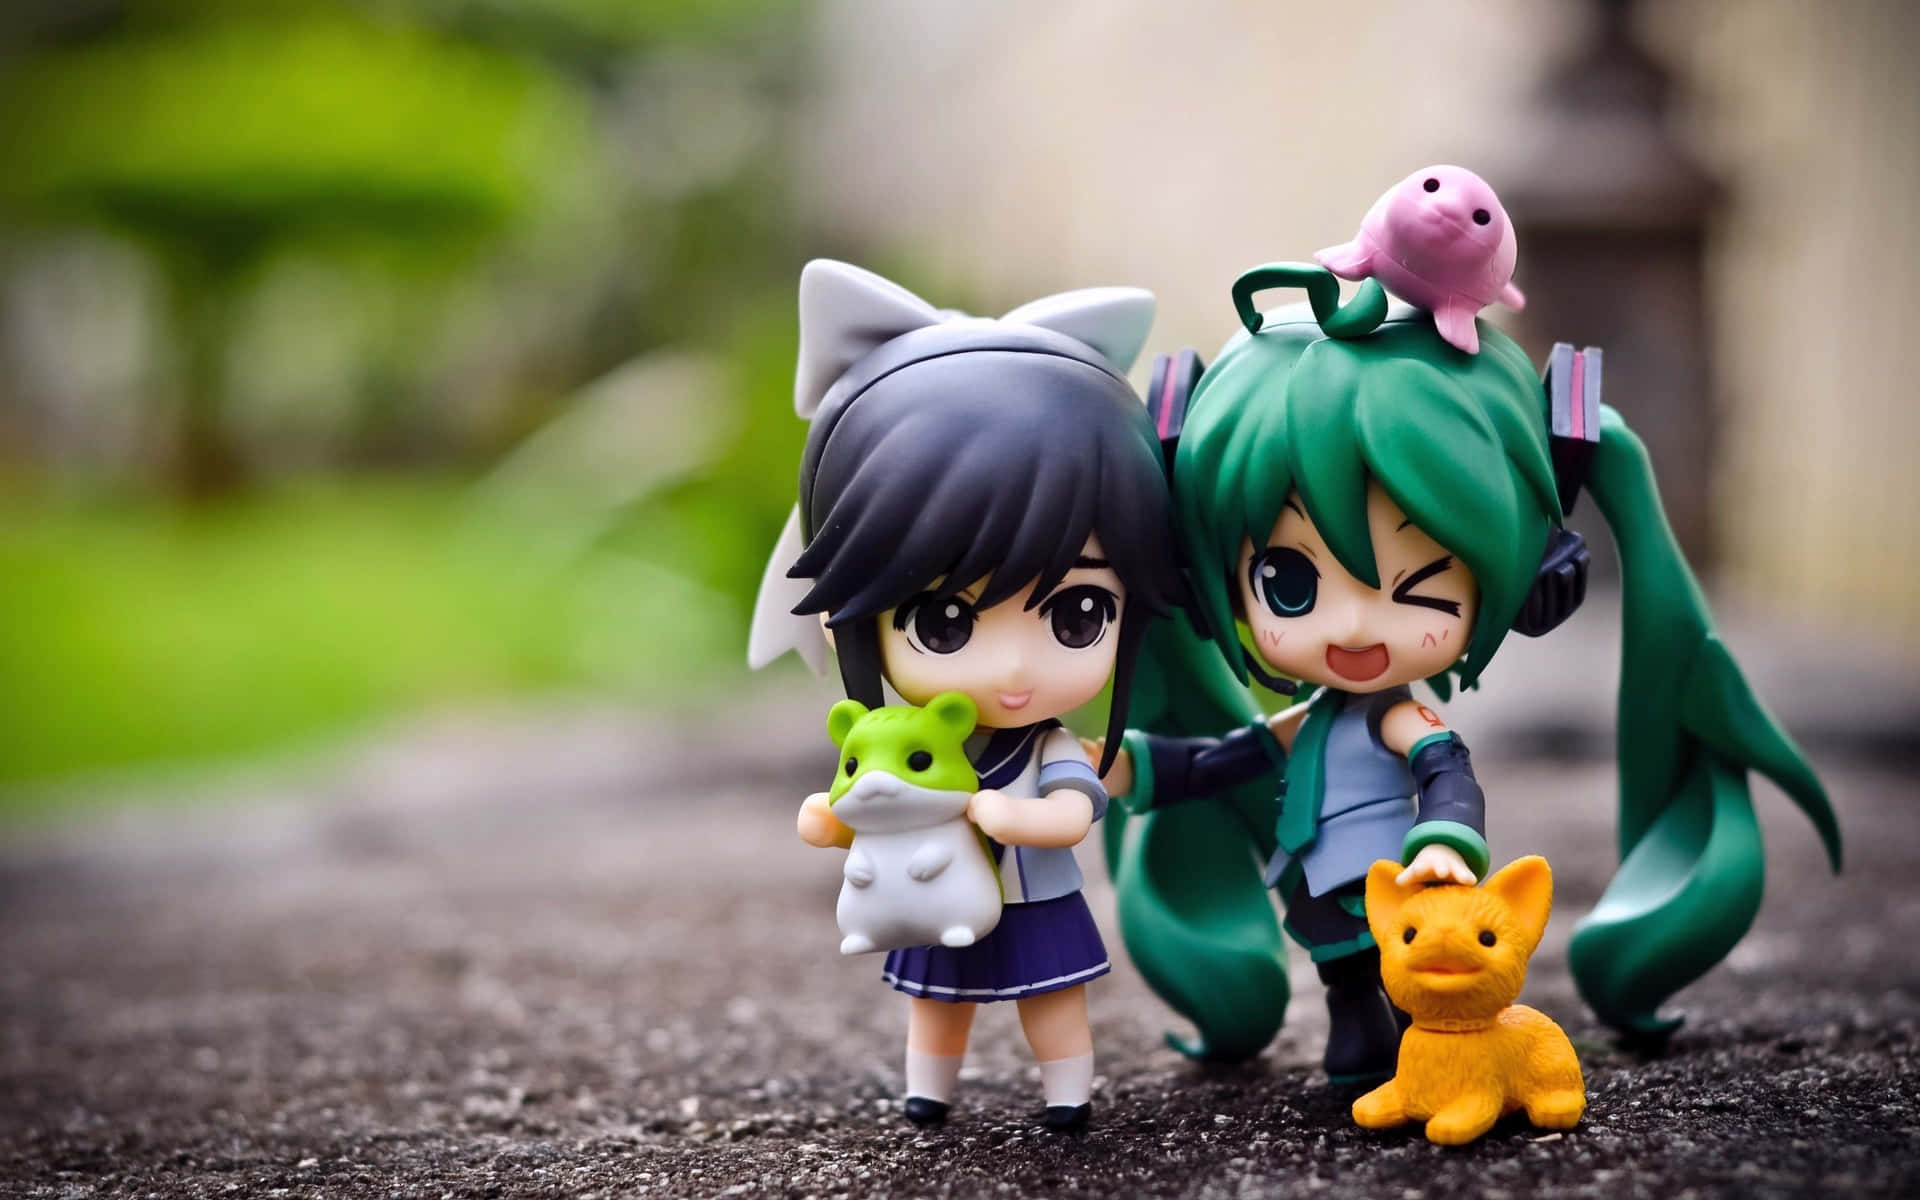 Adorable Anime Figurines Outdoors Wallpaper